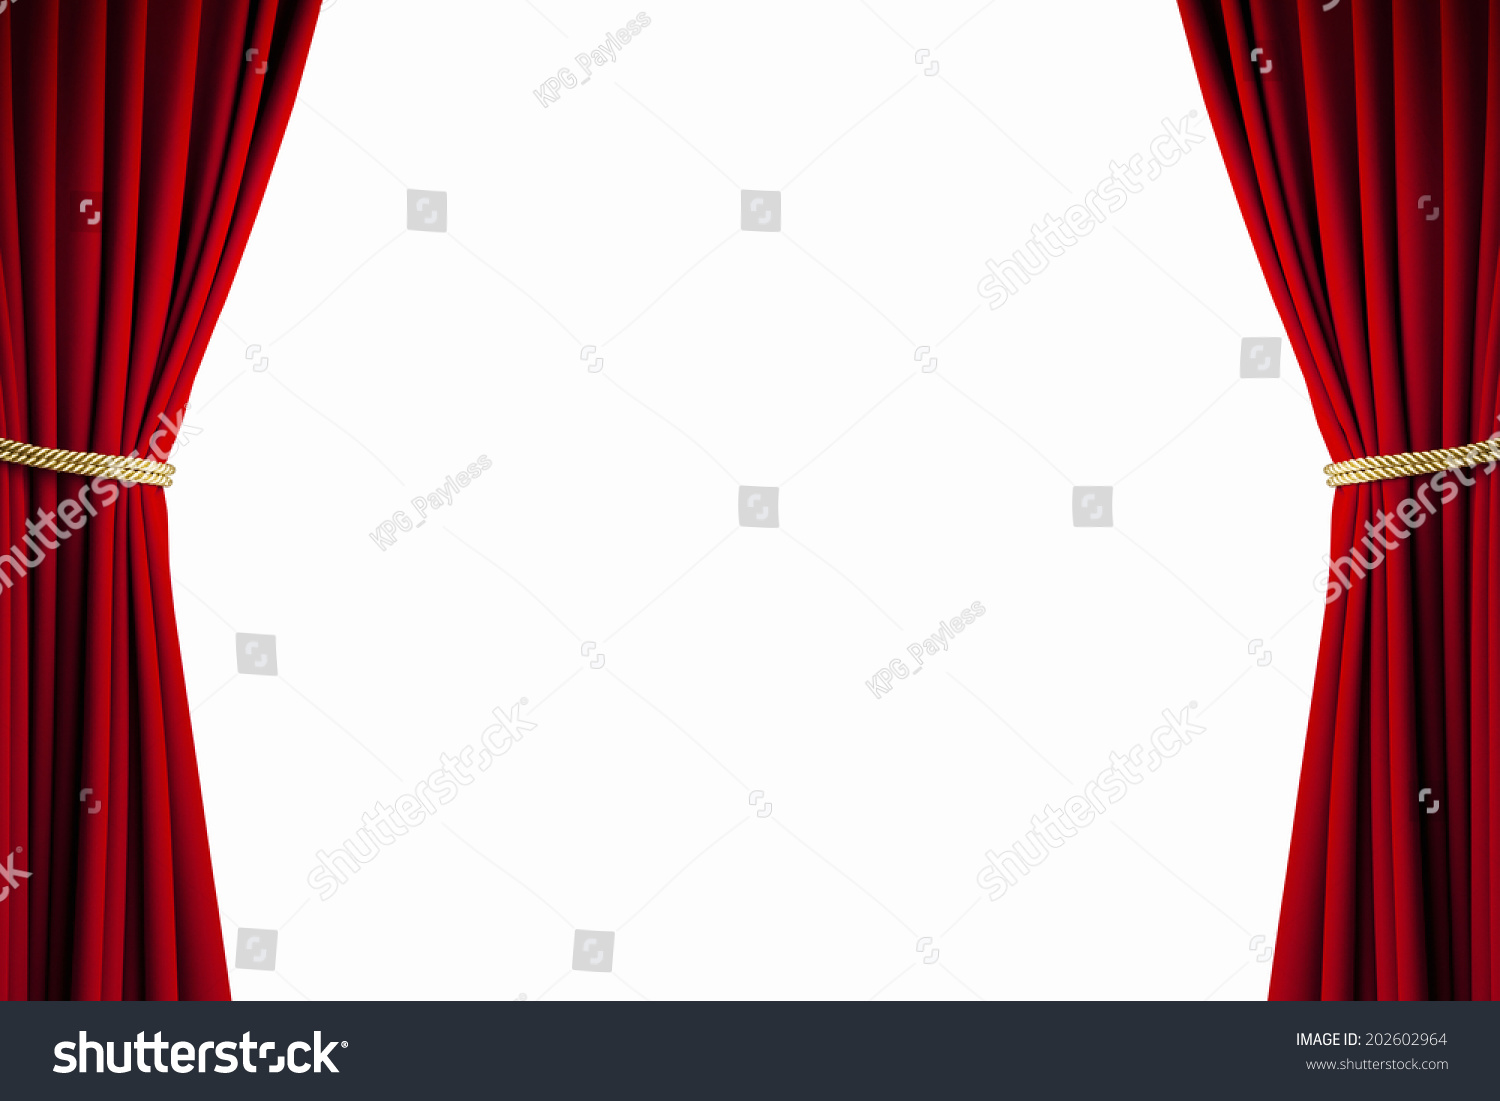 Image Stage Stock Photo 202602964 | Shutterstock